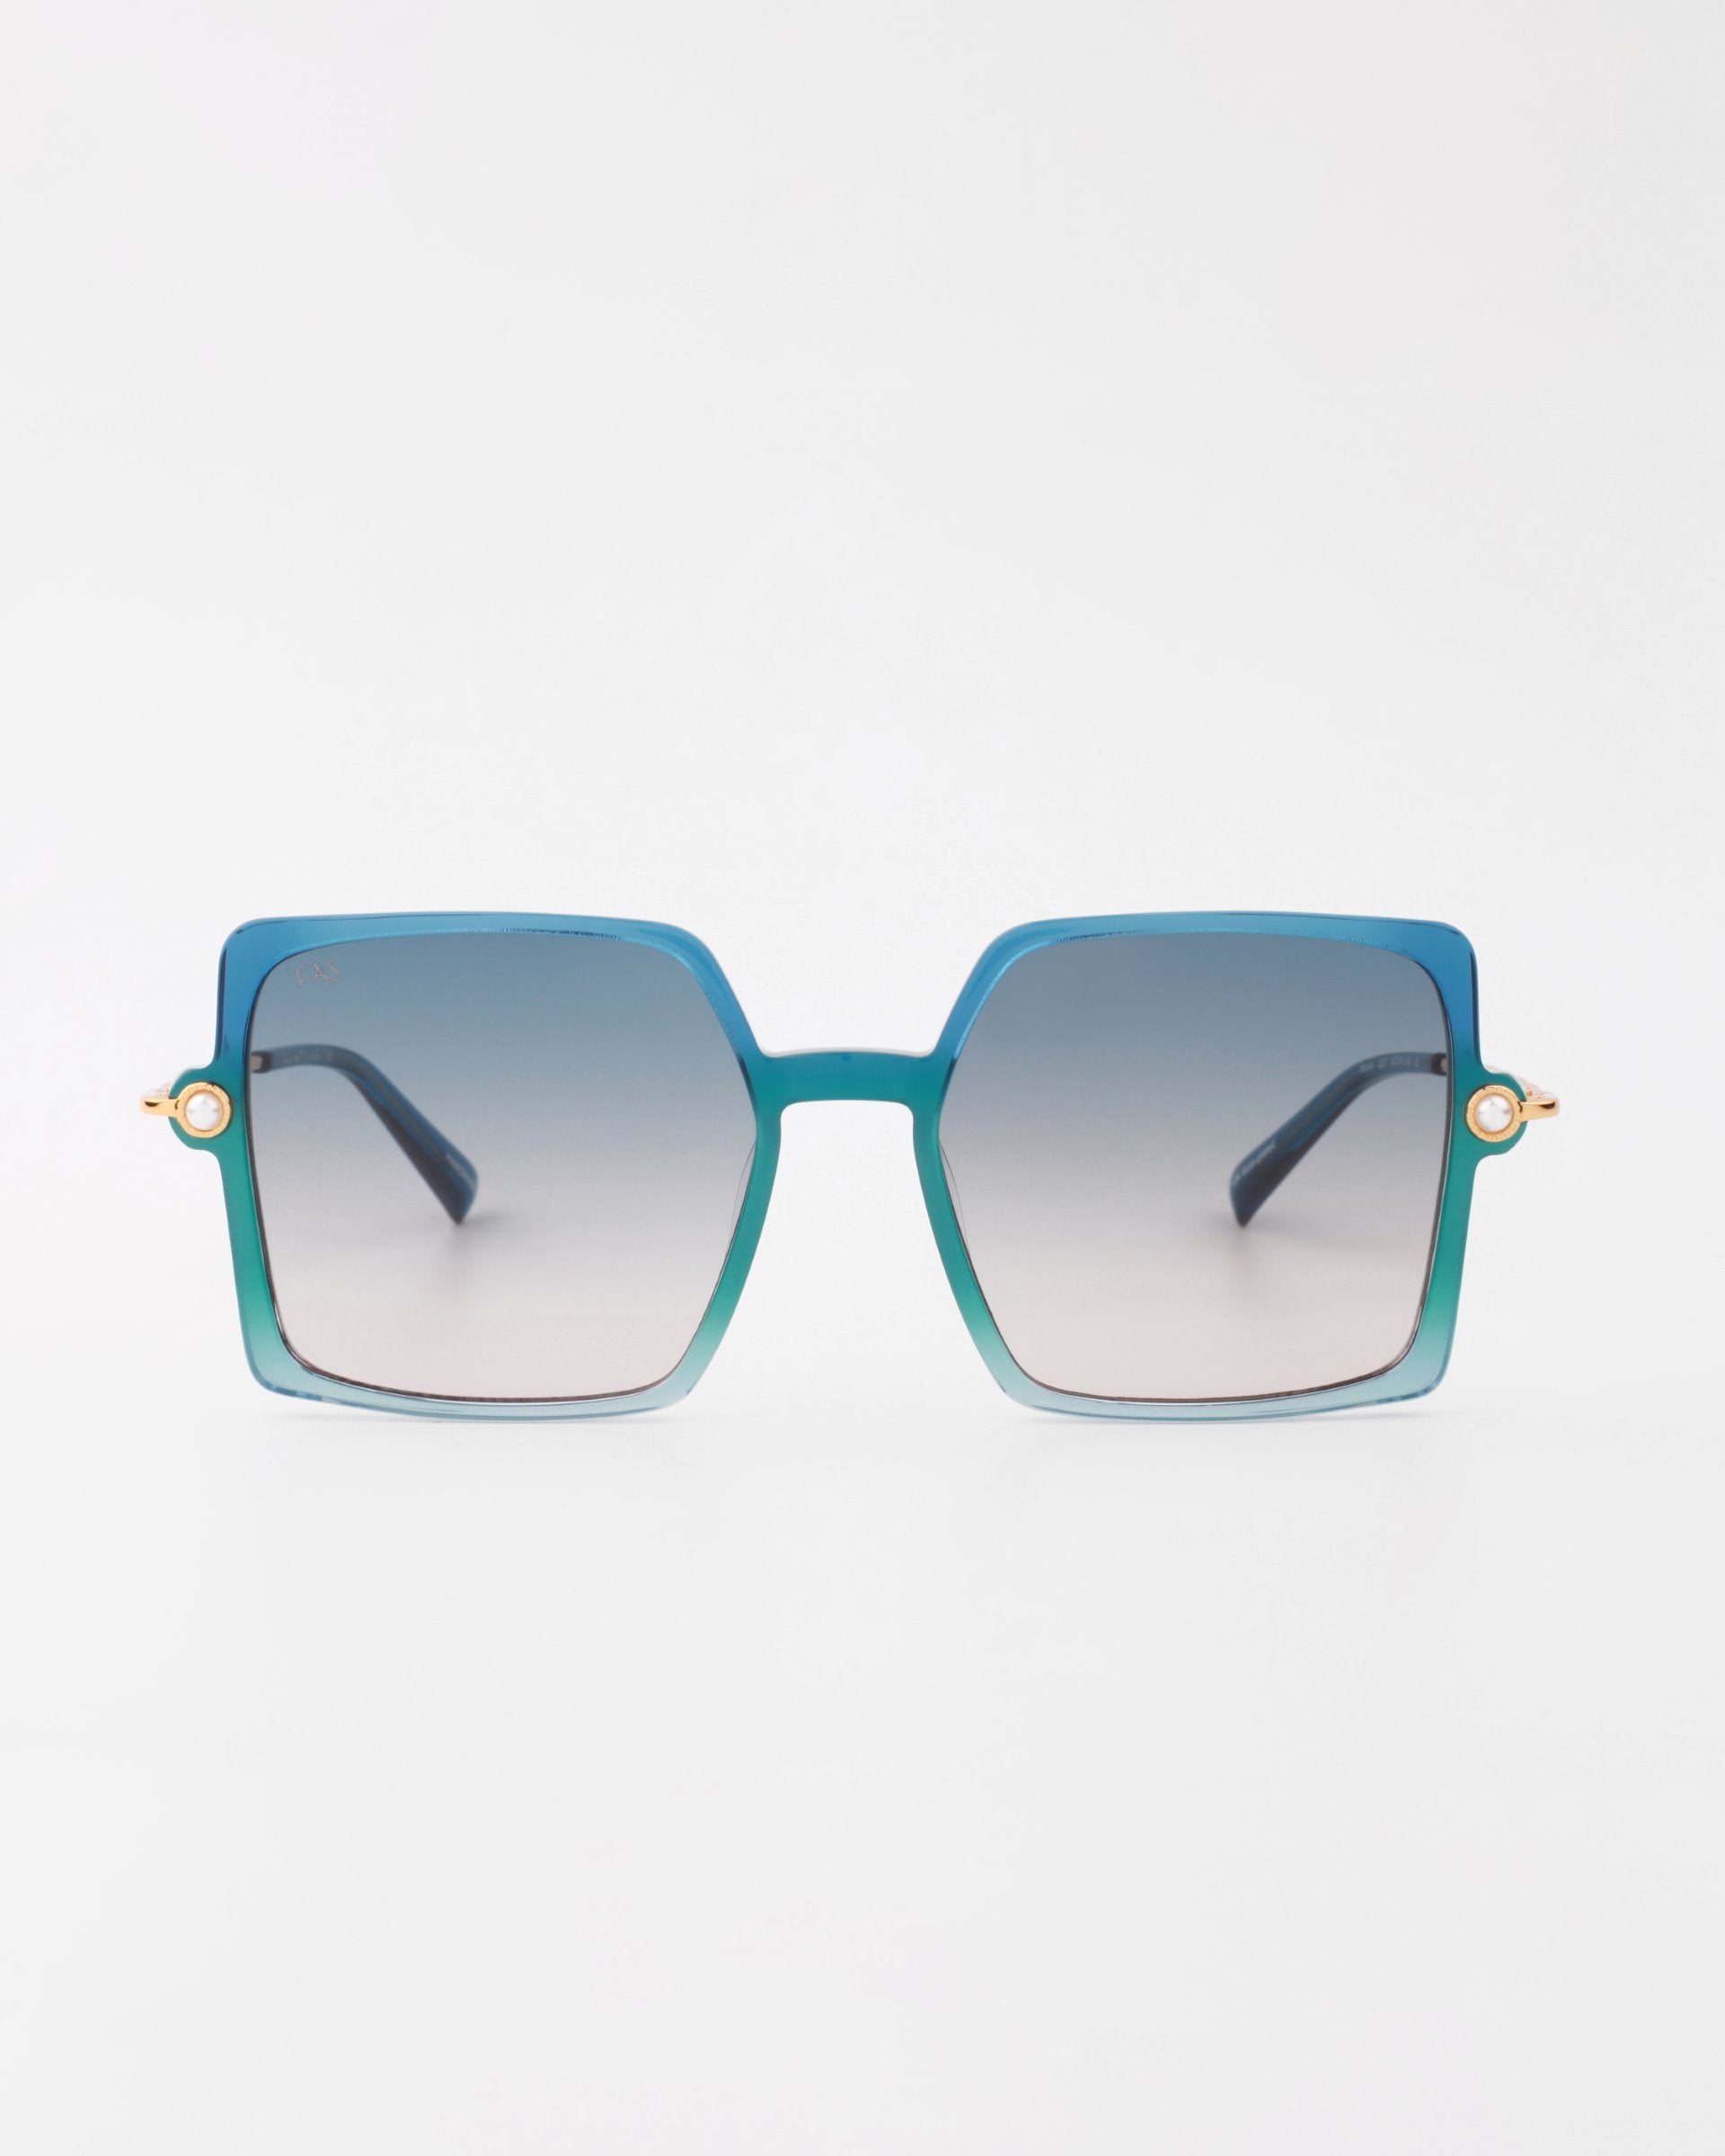 A pair of stylish handmade acetate sunglasses with gradient blue square lenses and thin 18-karat gold-plated arms on the sides. The frame transitions from blue at the top to a lighter shade at the bottom, offering complete UVA & UVB protection against harmful rays. The product is called Moxie by For Art's Sake®. The background is plain white.